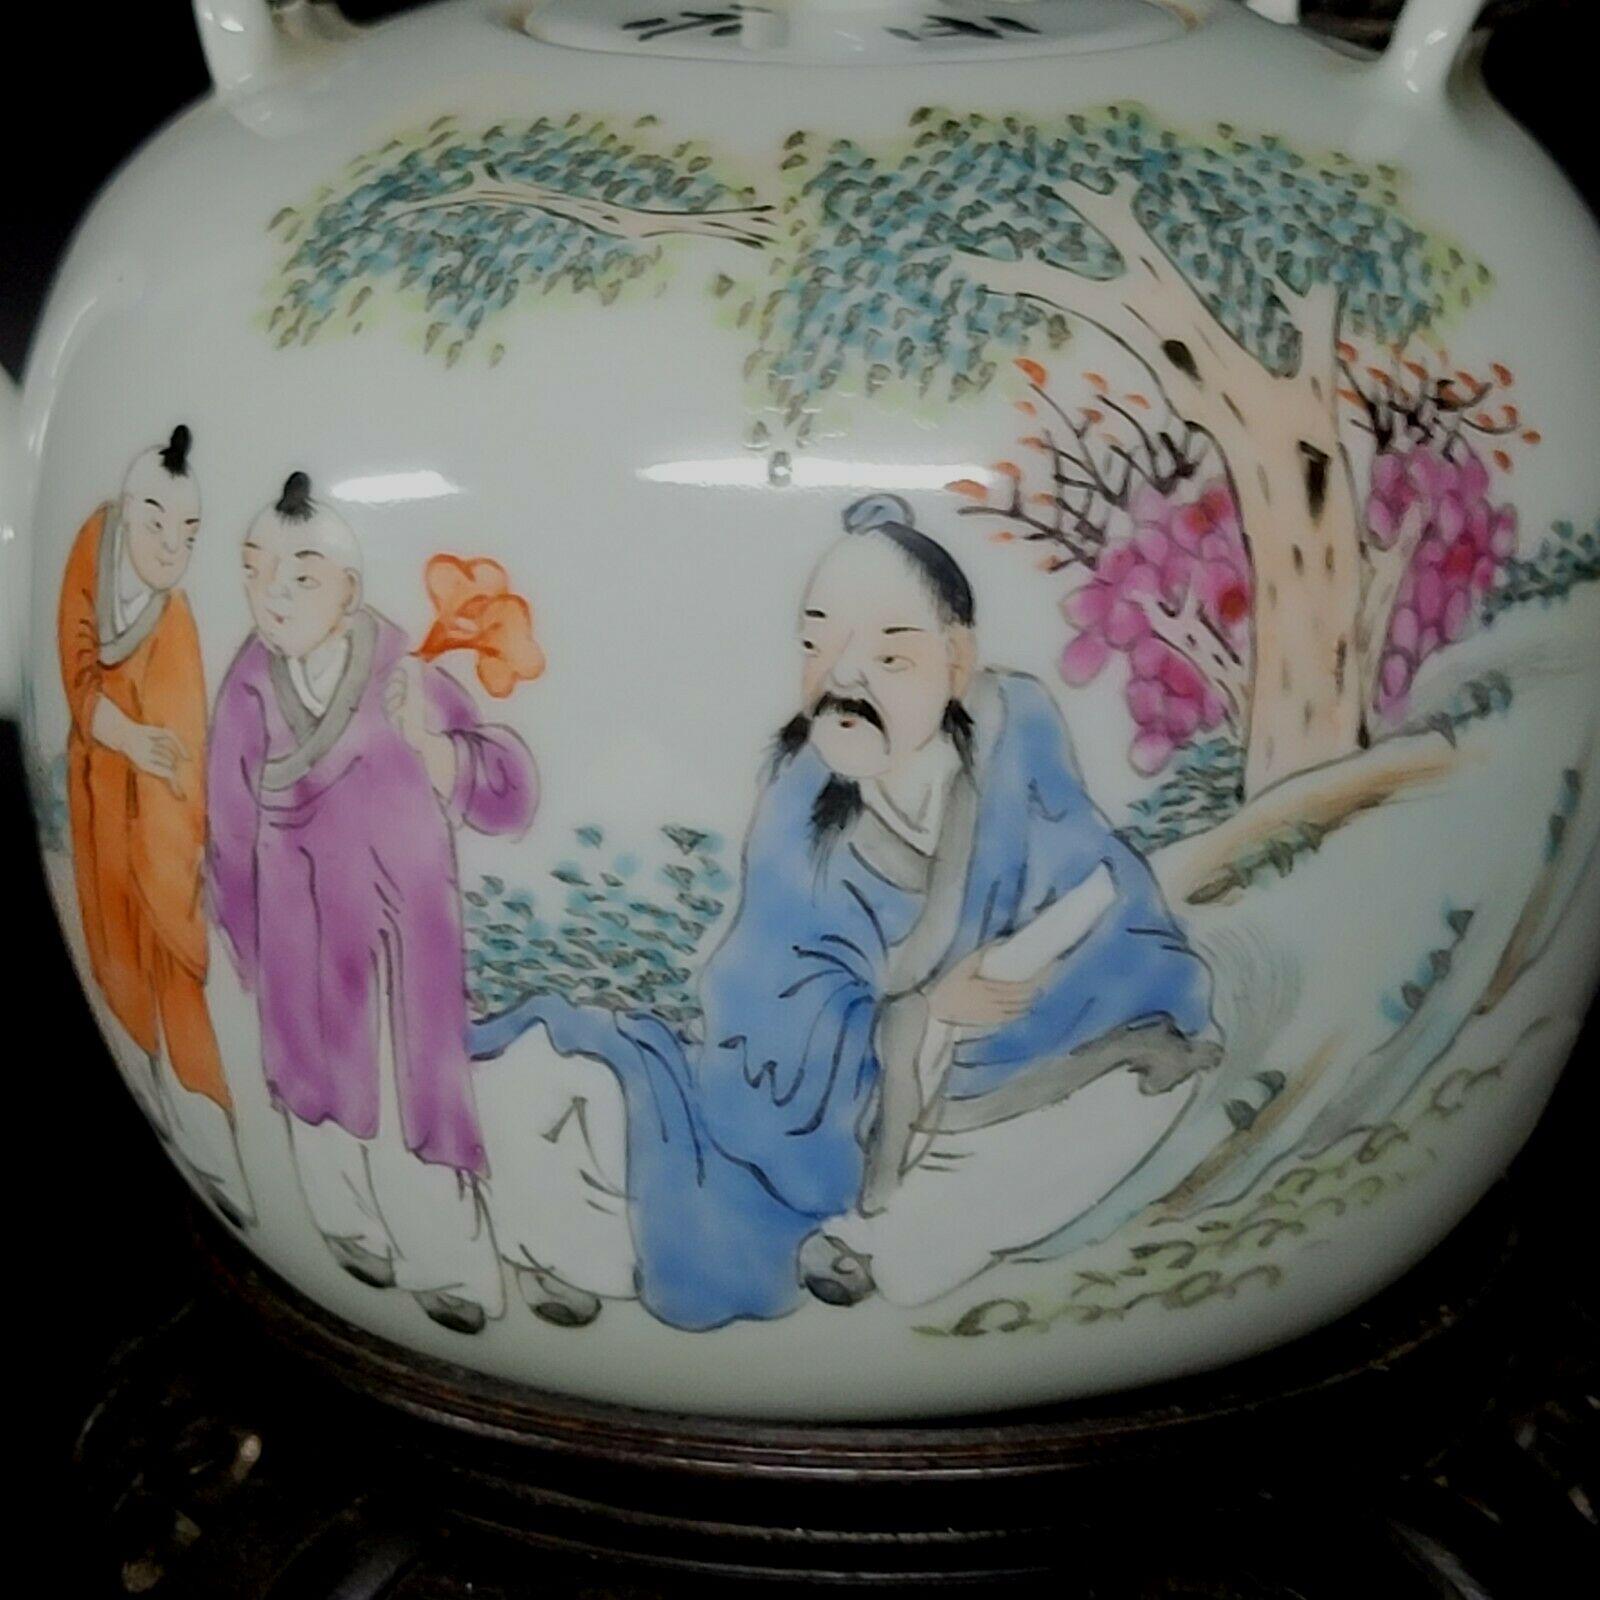 A Chinese Qianjiangcai Porcelain teapot with signature by the artist and period stamp on the bottom, depicting the schalor man teaching two kids in the garden, a late 19th century example. wood stand included.

.